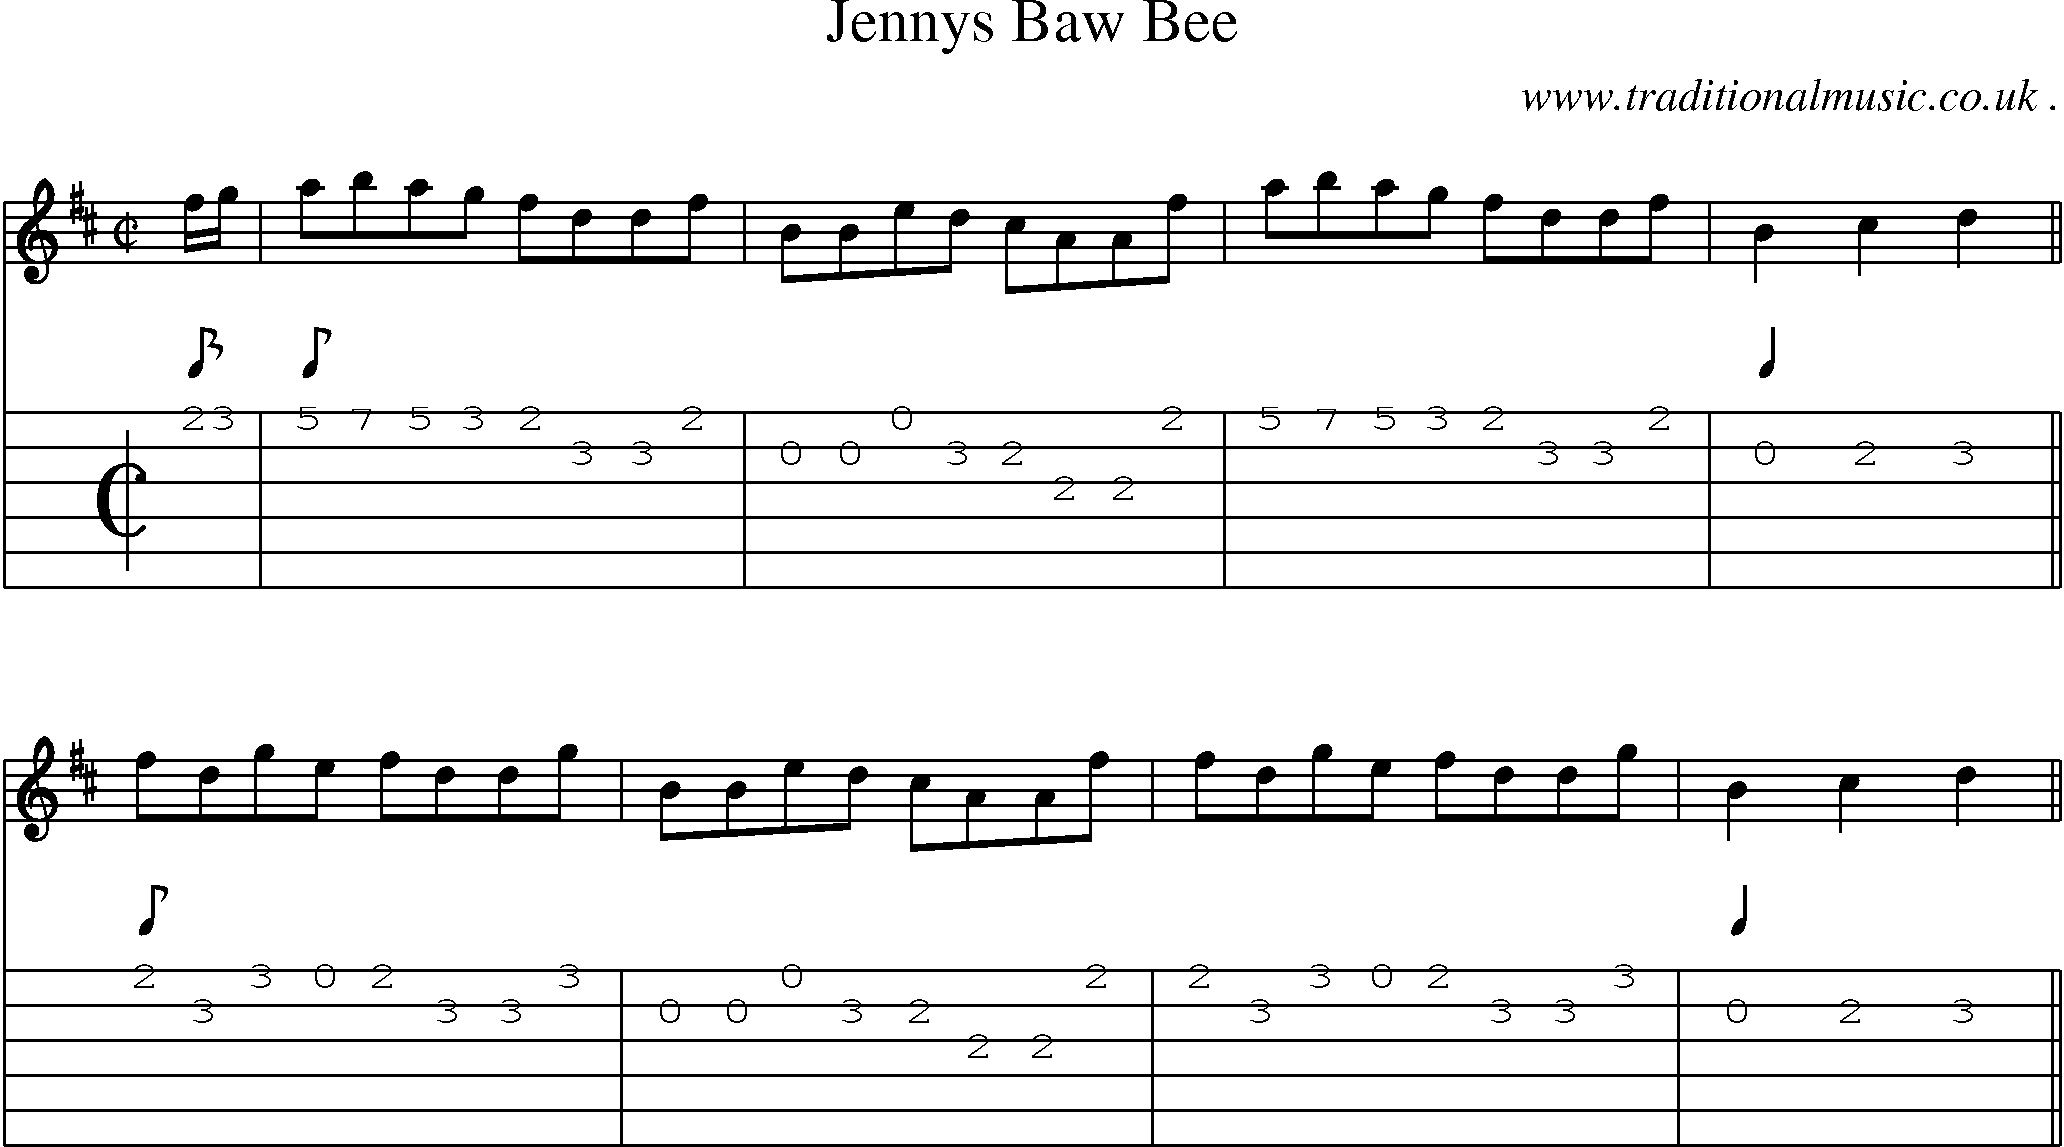 Sheet-Music and Guitar Tabs for Jennys Baw Bee